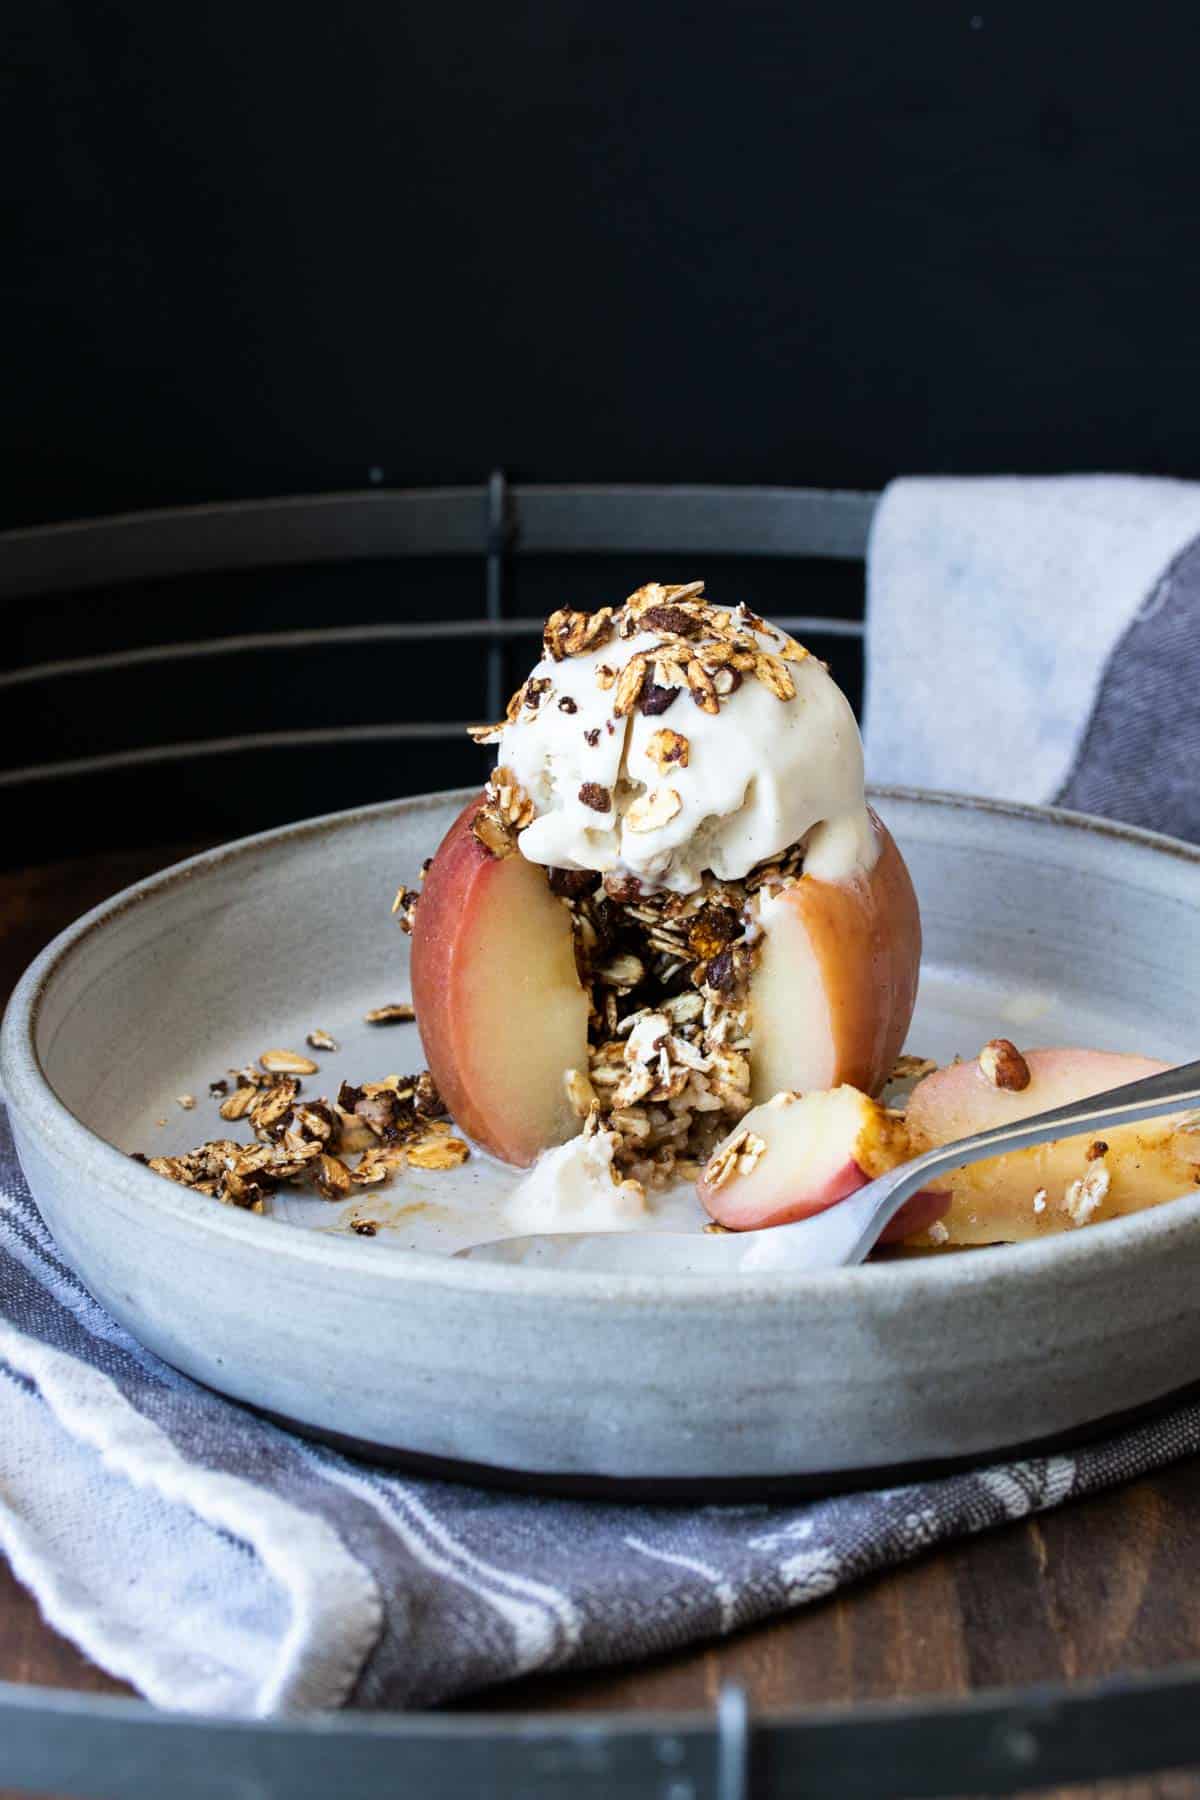 A baked apple with a piece out filled with oats on a grey plate.